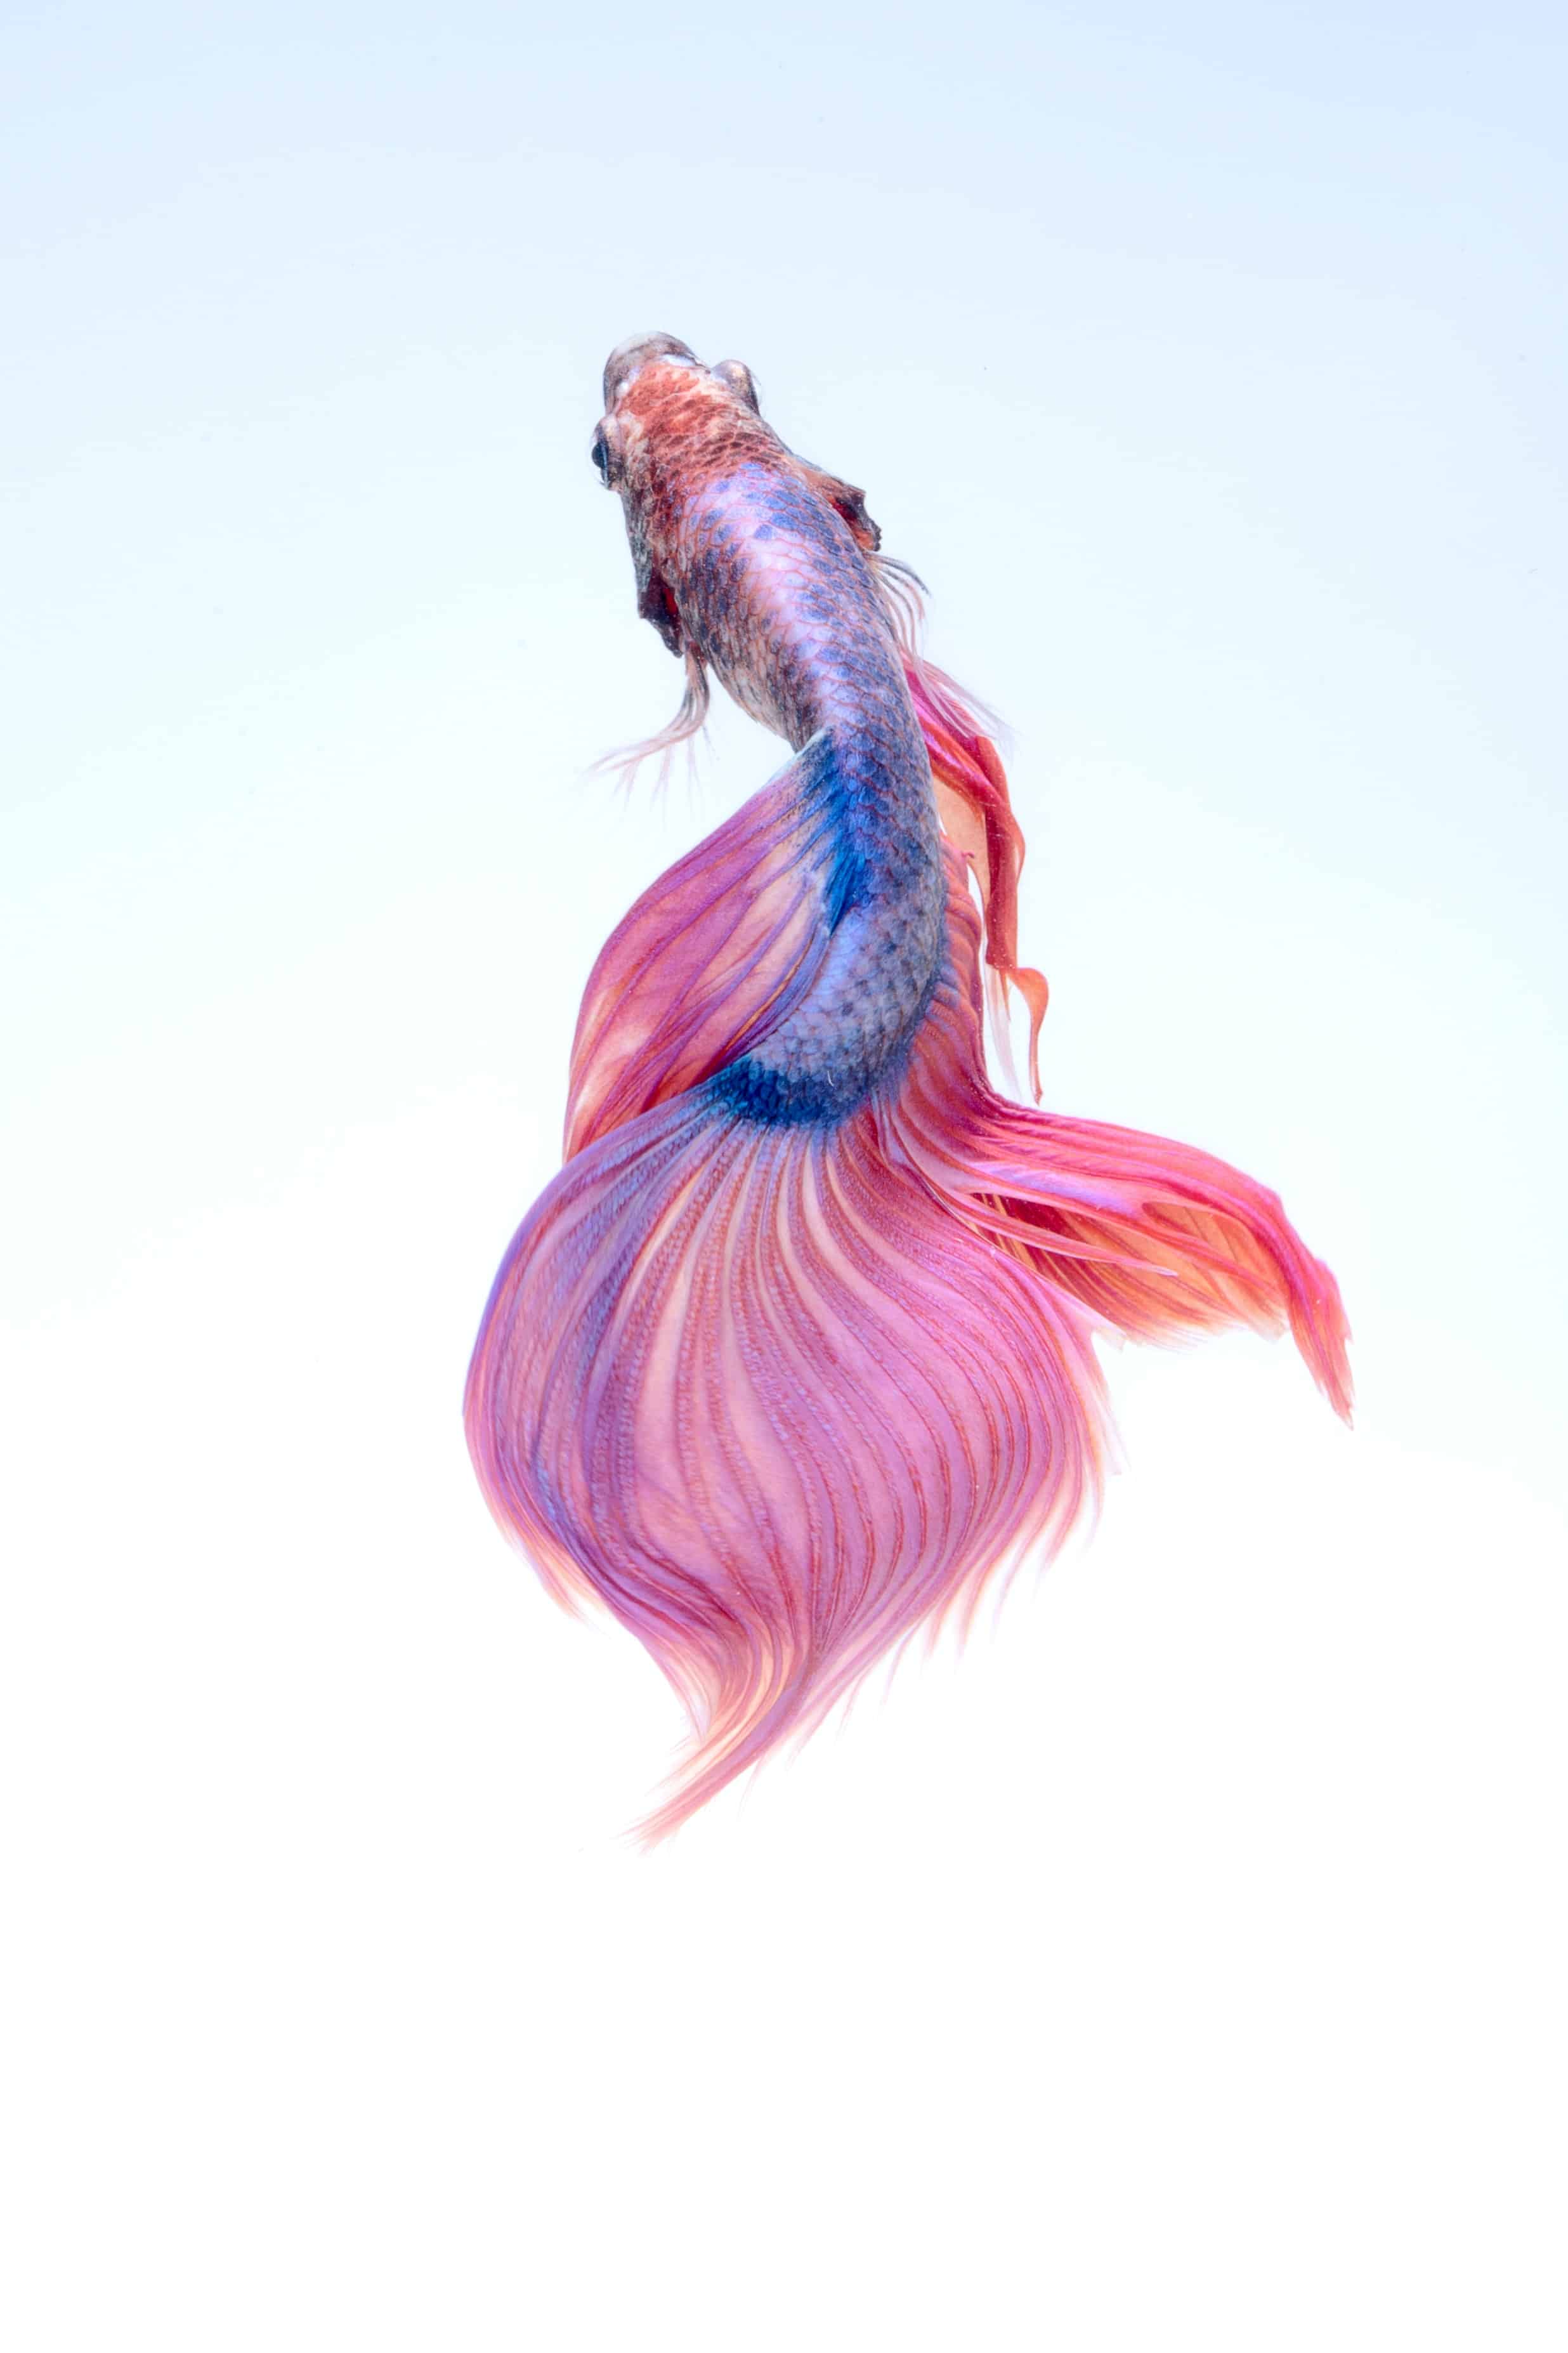 How to Prolong Betta Fish Life